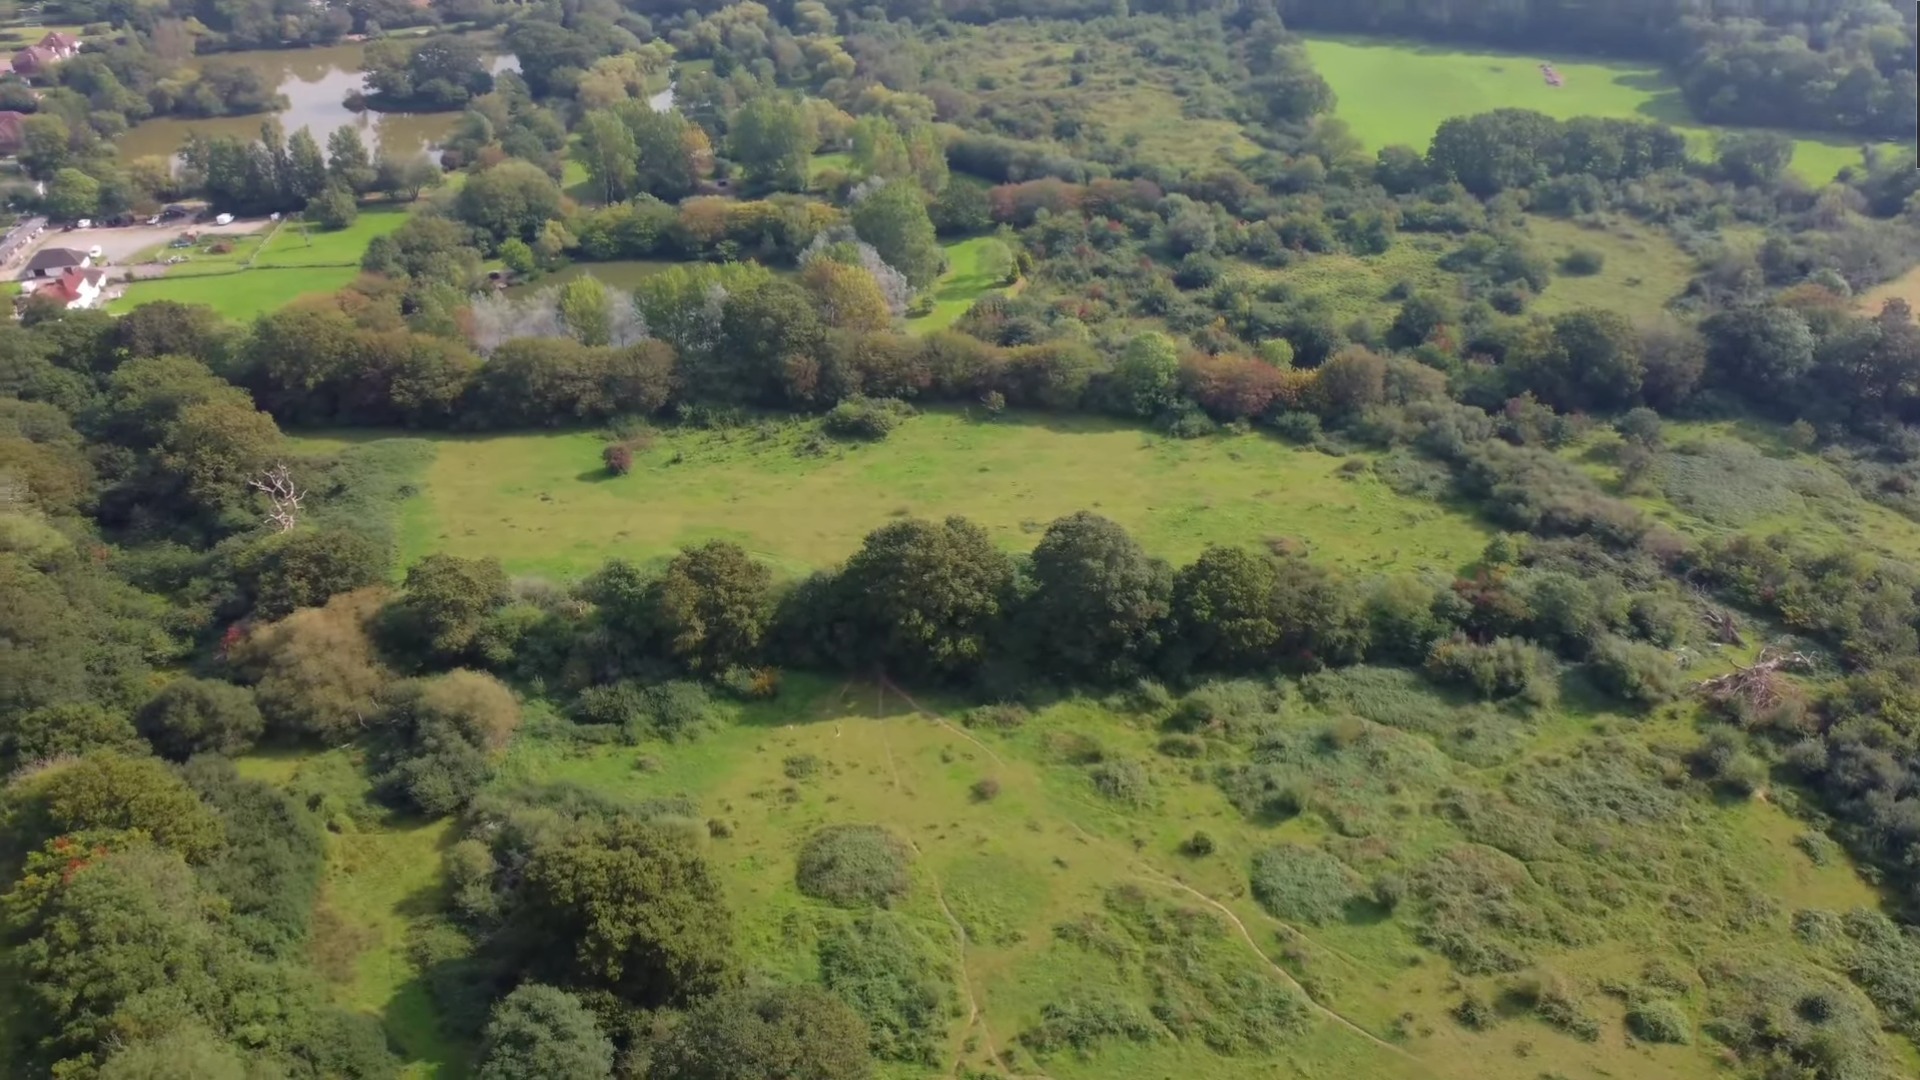 Drone footage of the Folders Lane site. Image: South of Folders Lane Action Group